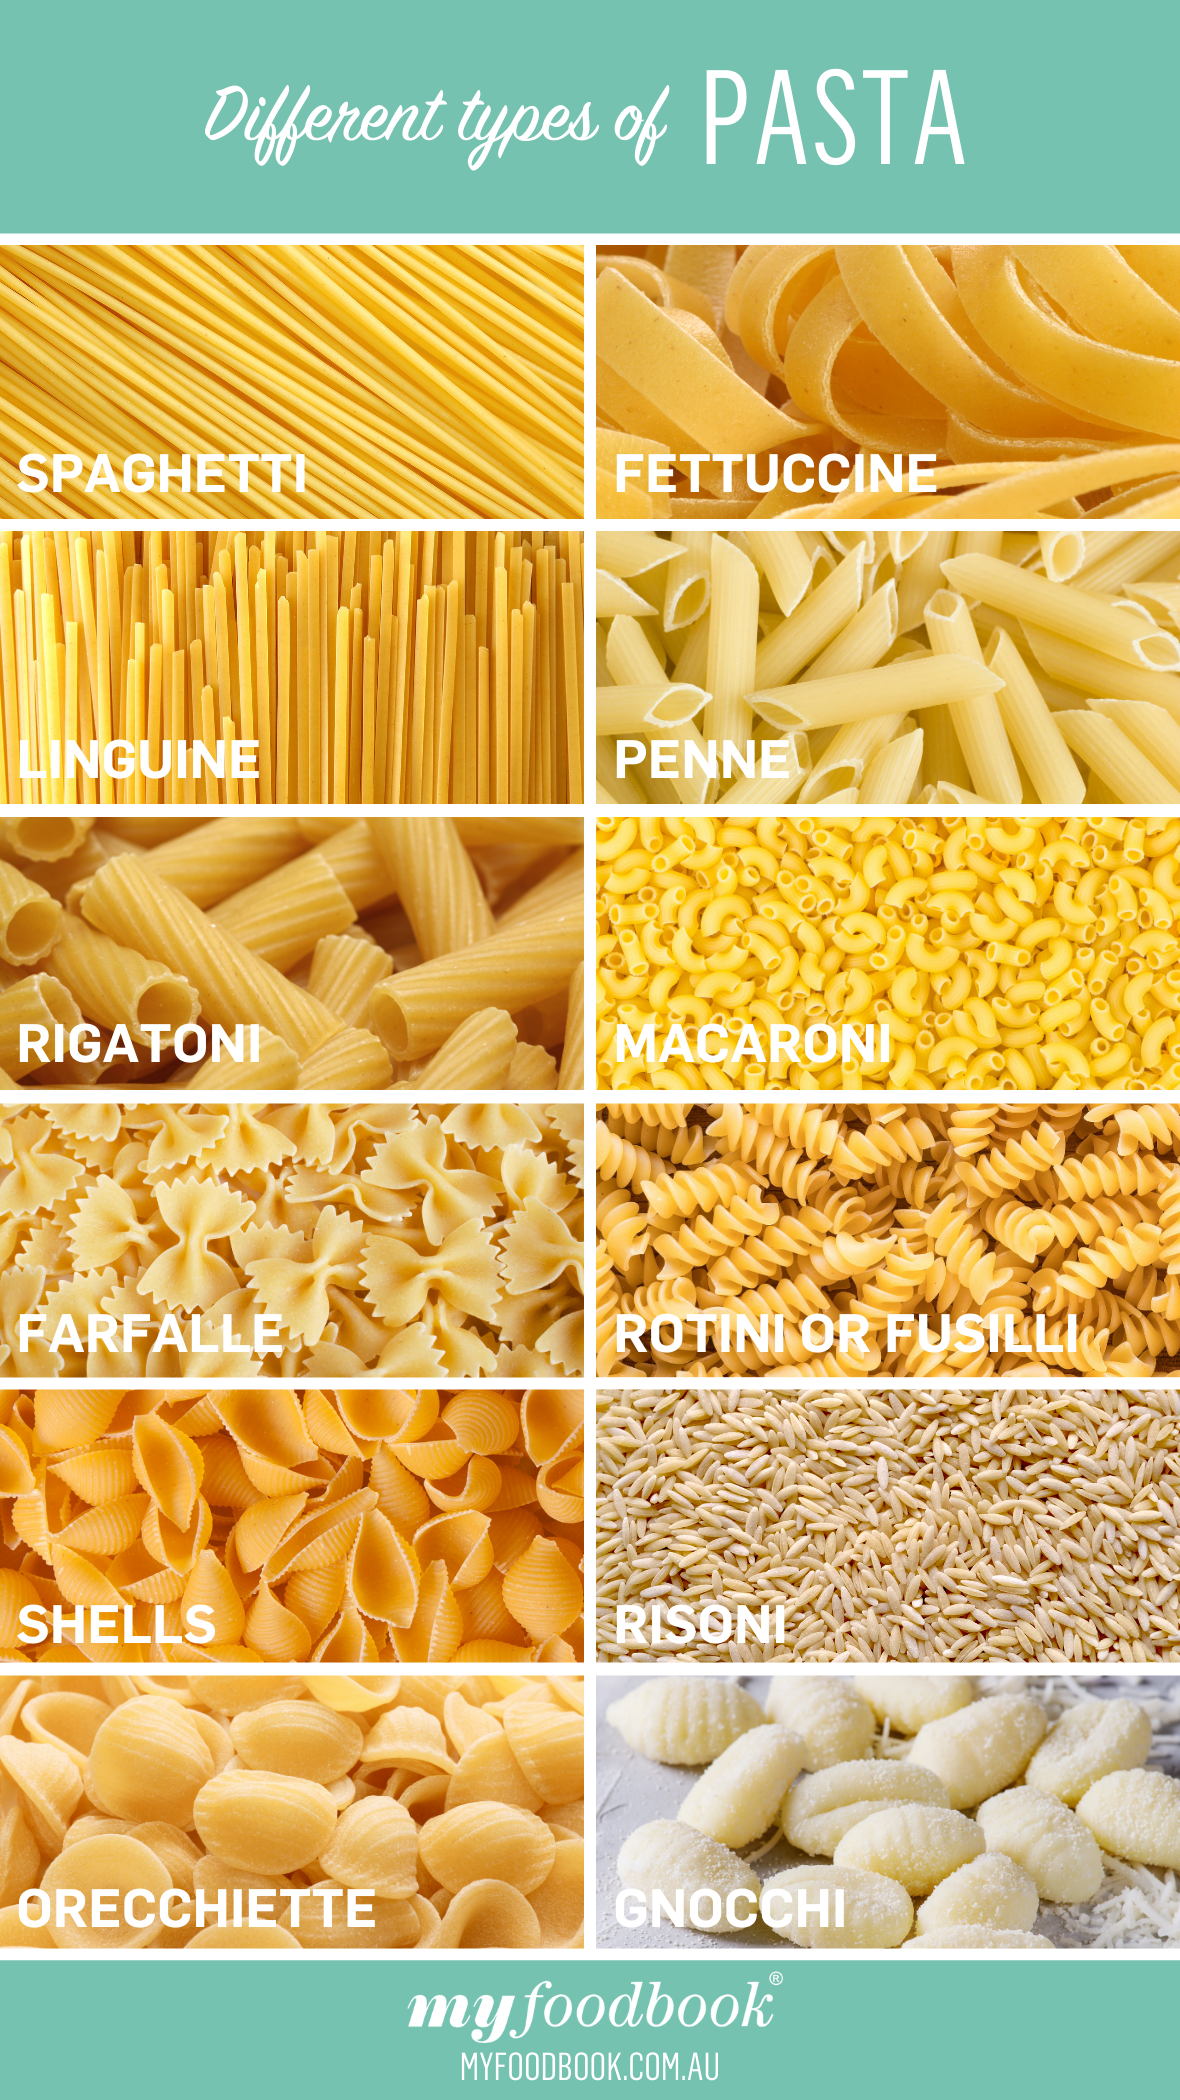 https://myfoodbook.com.au/sites/default/files/pictures/different-types-of-pasta.png